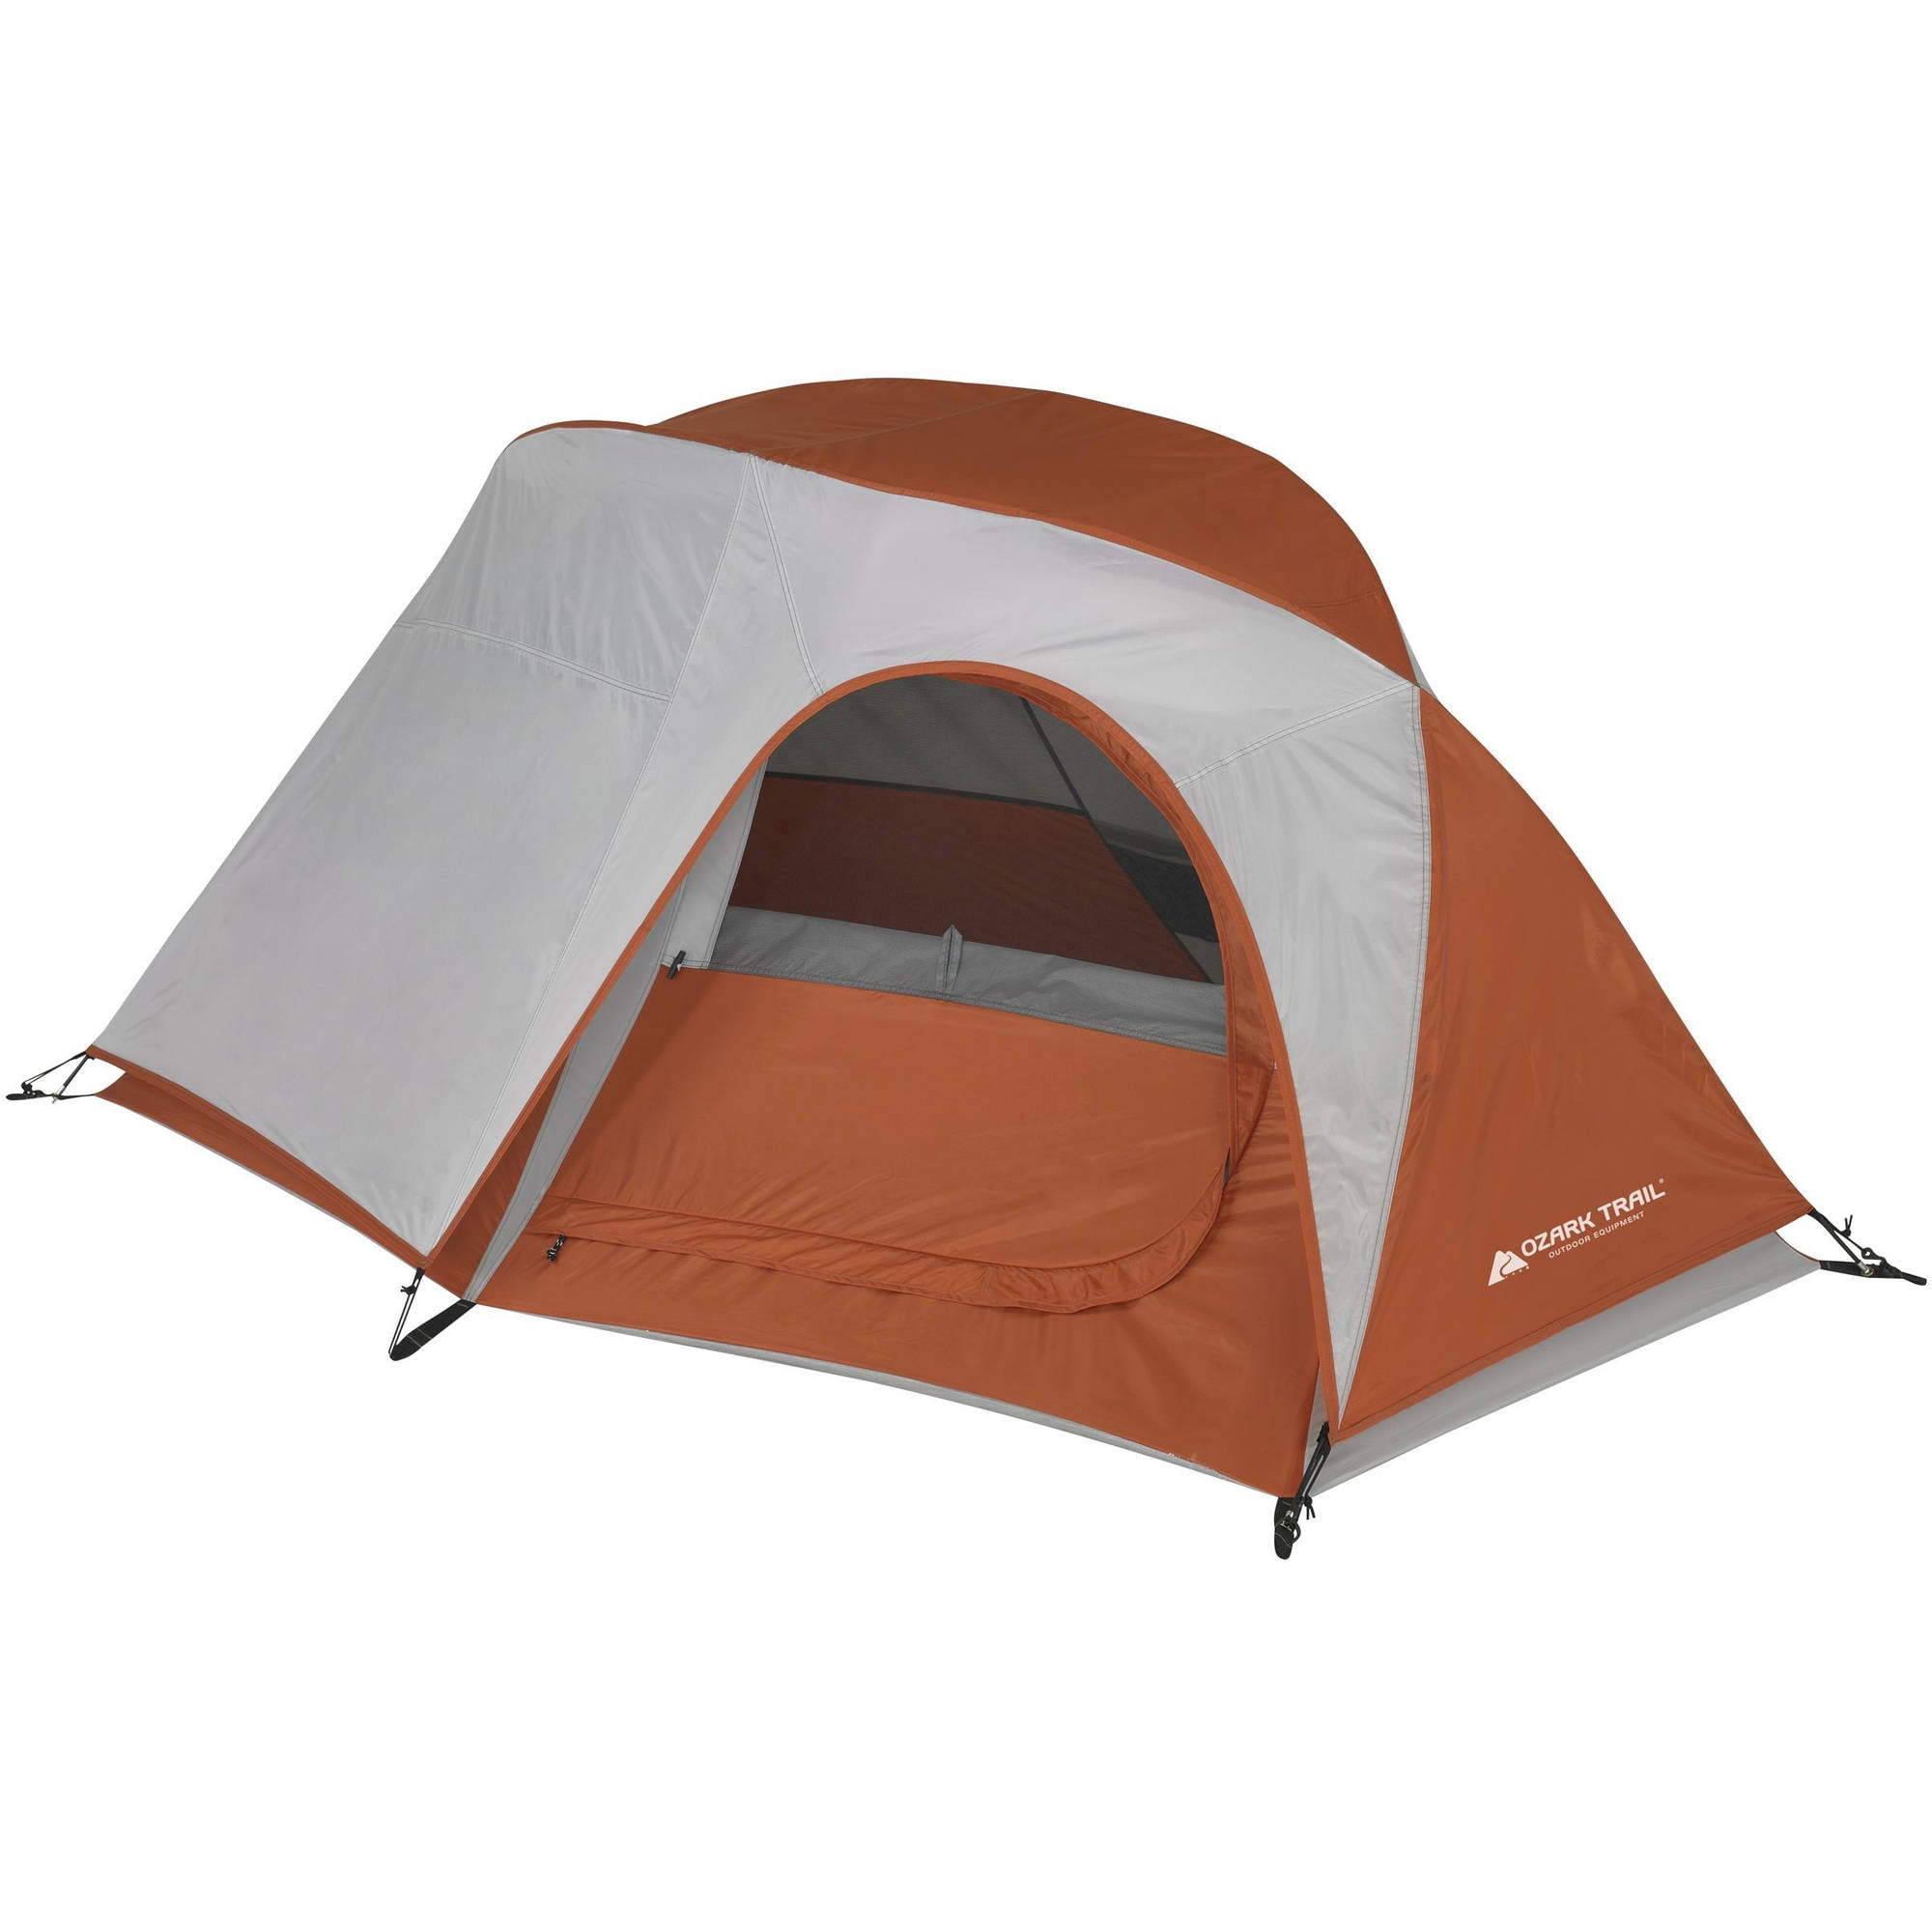 Ozark Trail Oversized 1-Person Hiker Tent w/ Large Door for Easy Entry $19.97 + Free S&H w/ Walmart+ or $35+